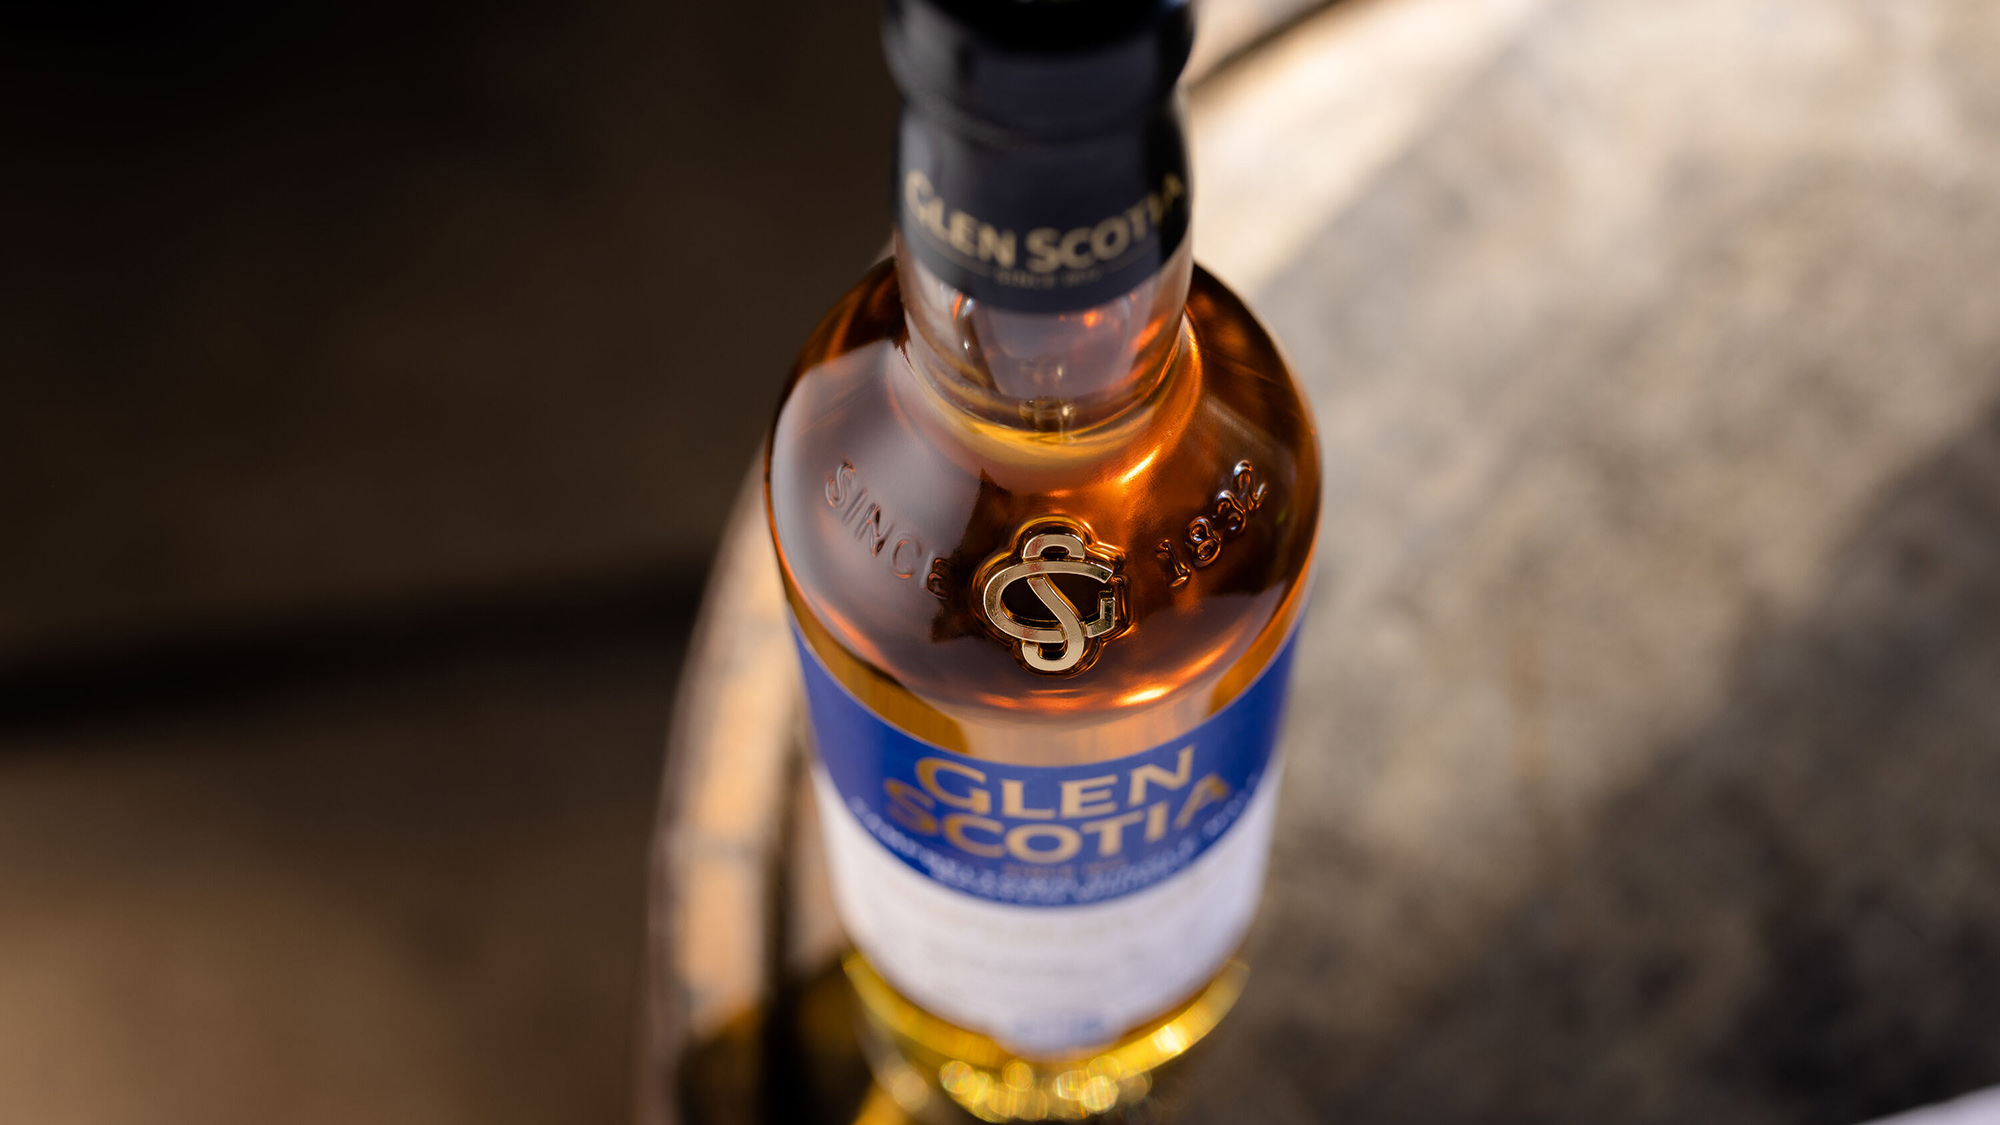 Glen Scotia Distillery of the Year whisky